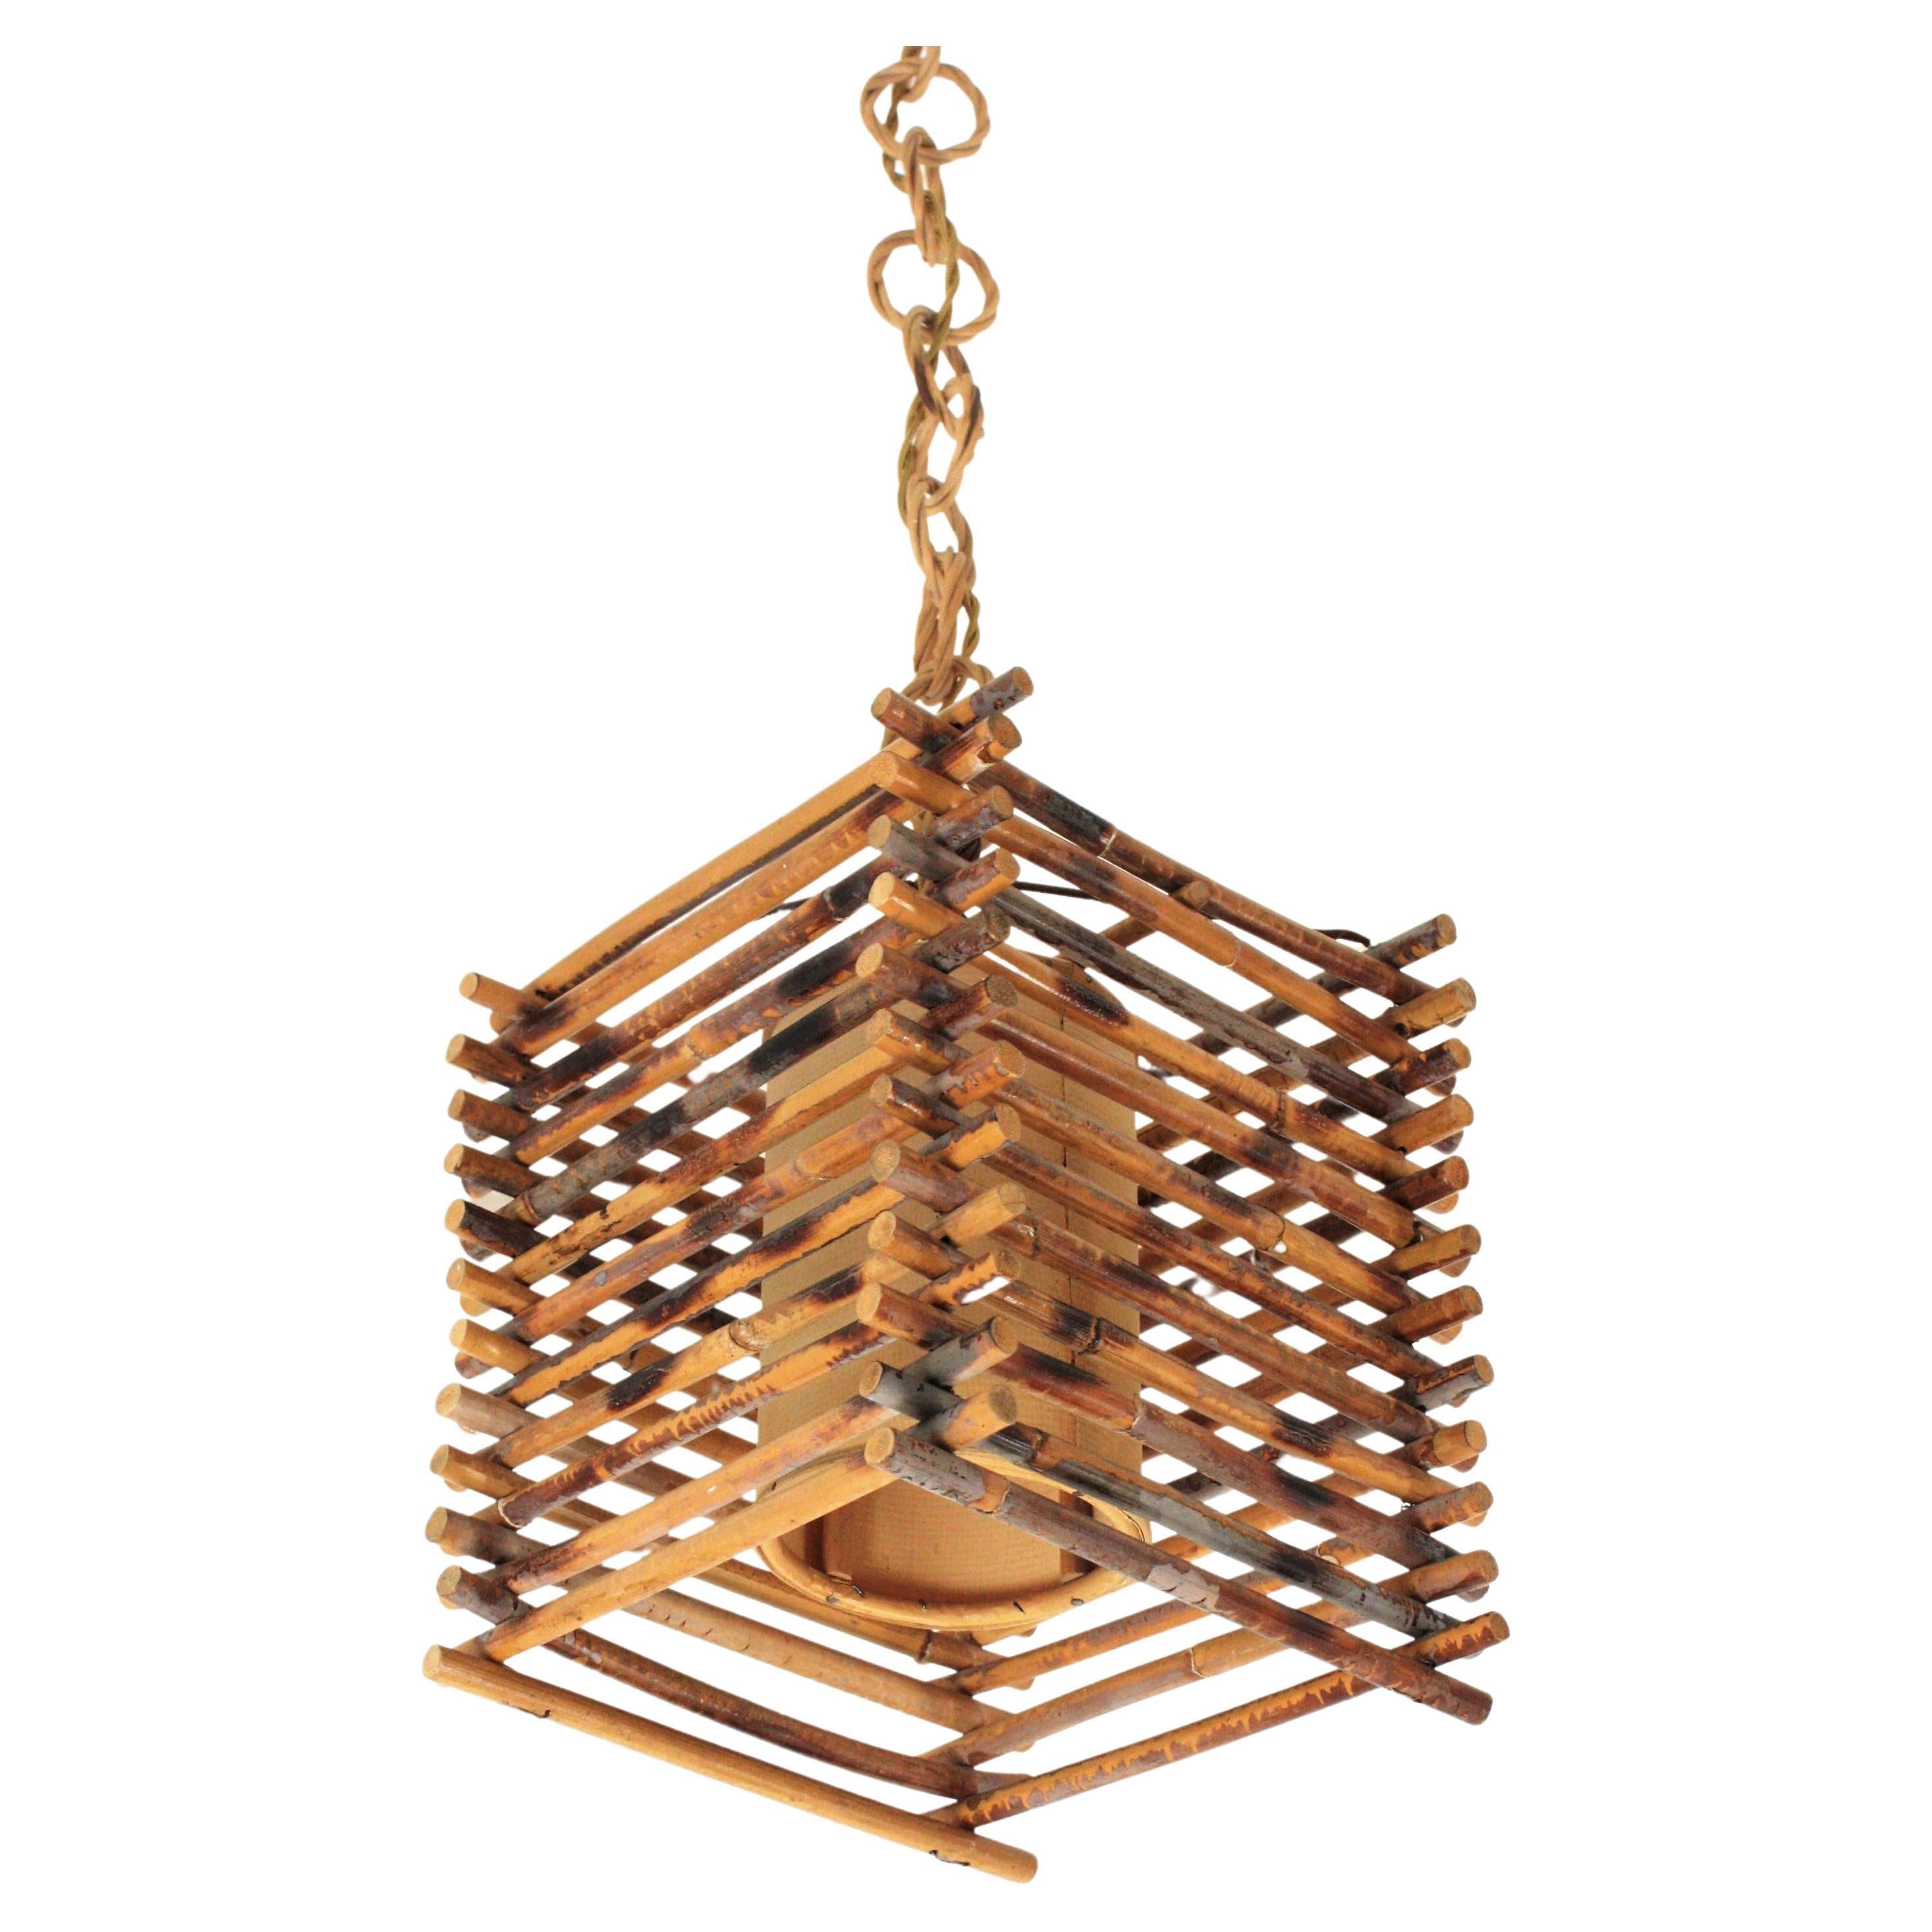 Oriental Inspired rattan lantern. France, 1950s-1960s.
This handcrafted ceiling lamp features a squared lantern made of rattan canes with an inner paper lampshade. The chain is made of wicker rings topped by a wood canopy.
This pendant lamp will